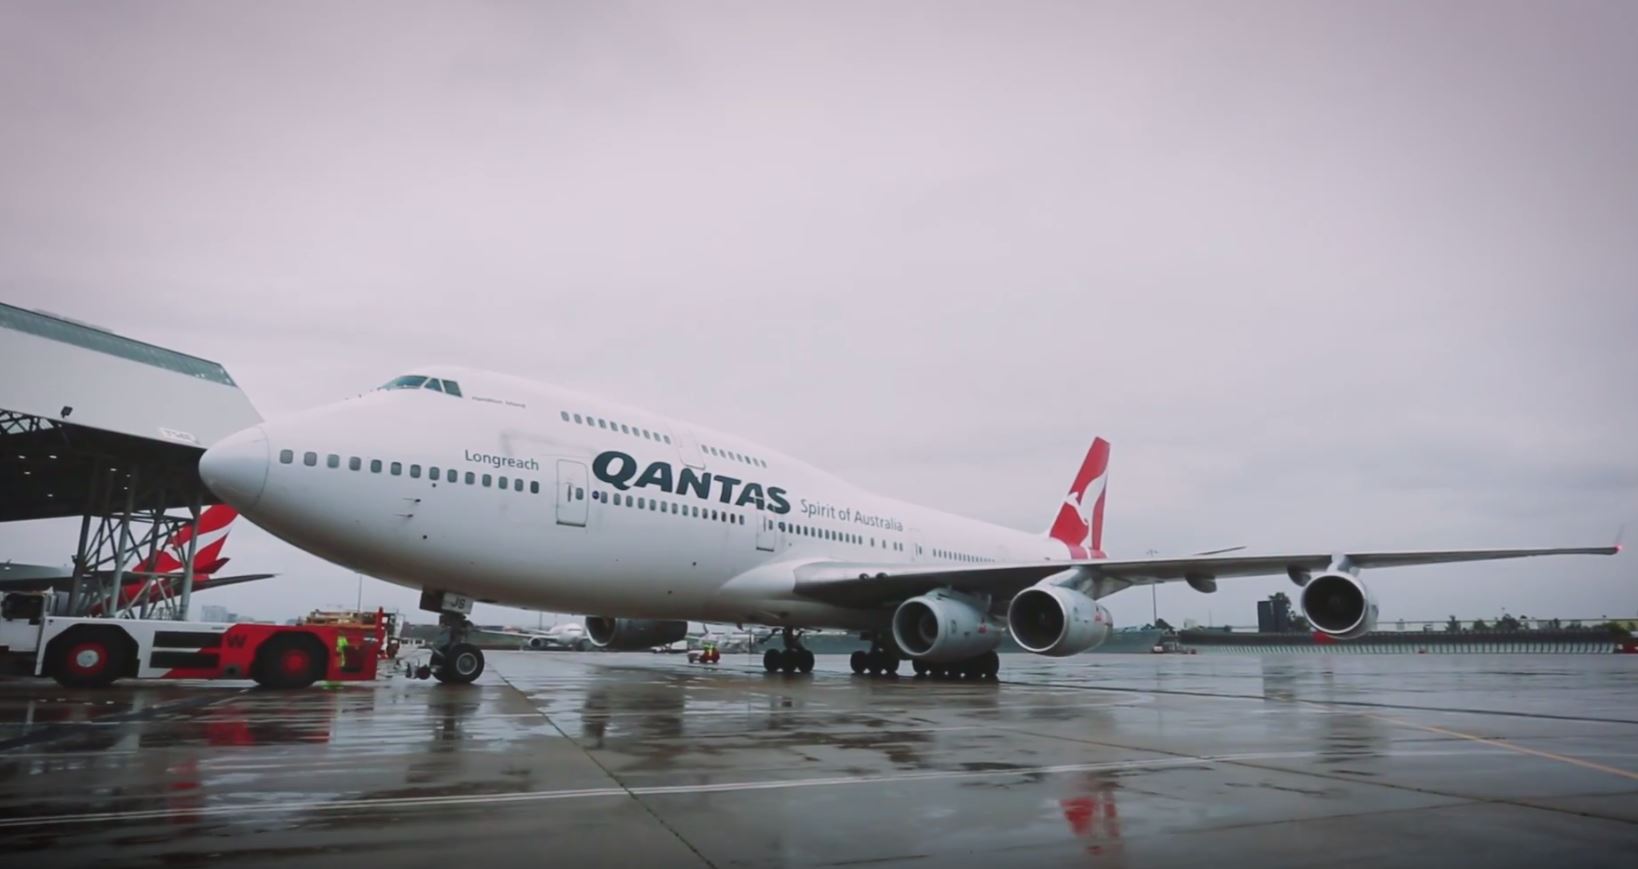 Qantas transports a fifth engine on a Boeing 747